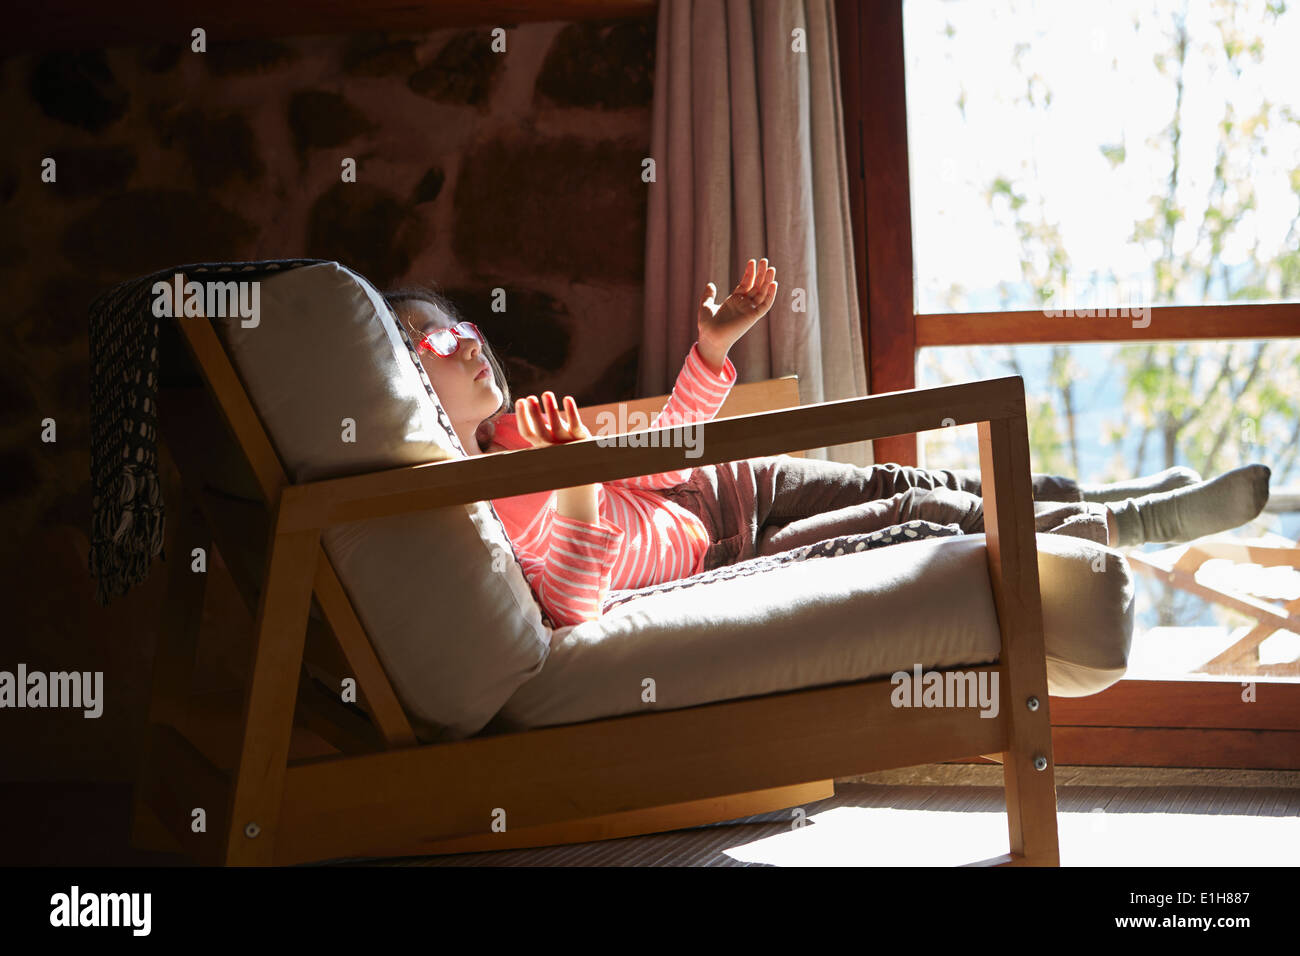 Young girl sitting on rocking chair daydreaming Stock Photo